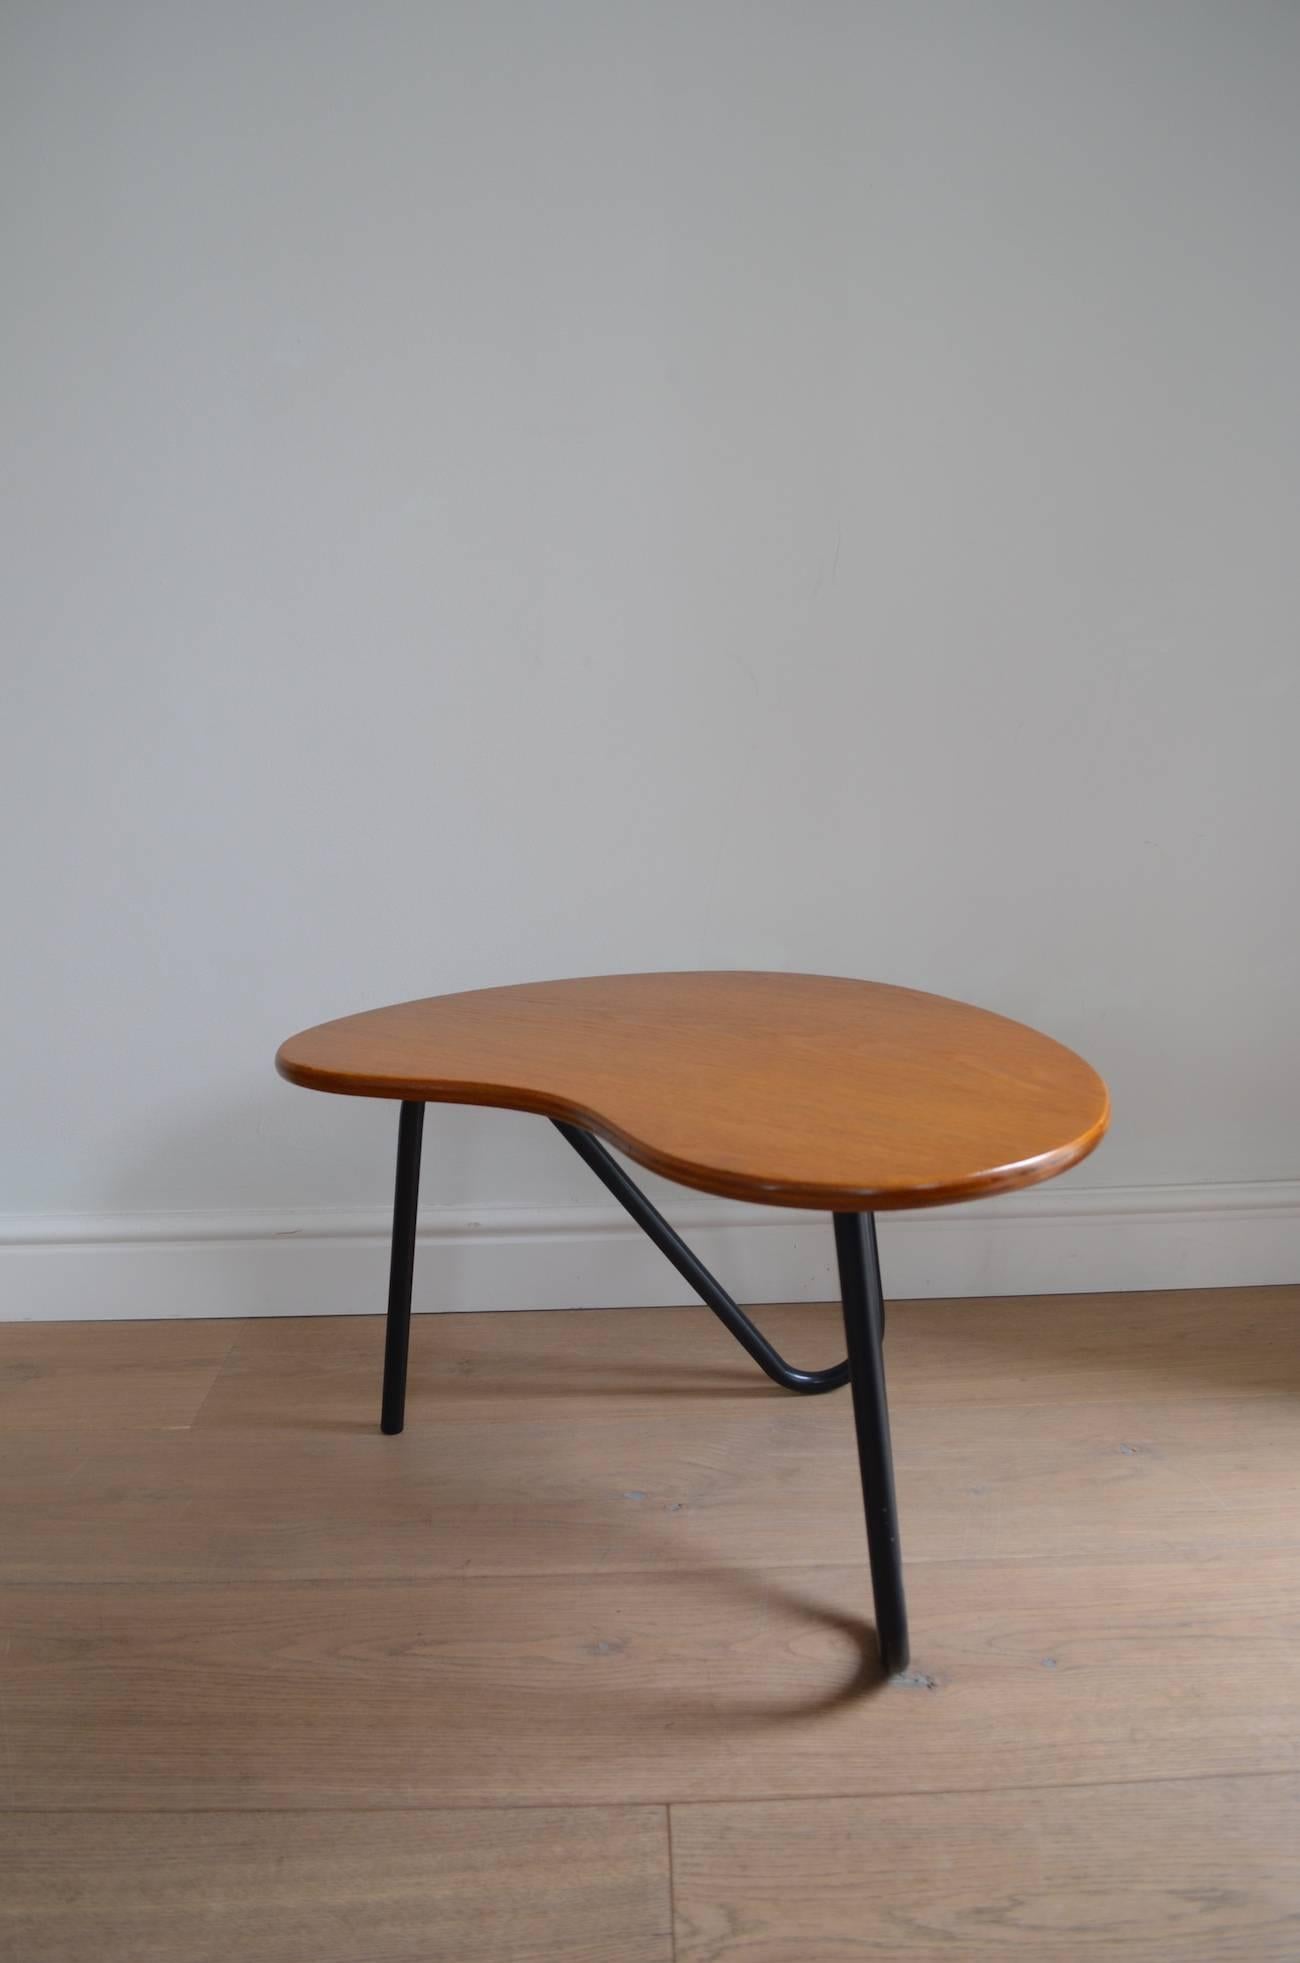 Pierre Guariche Prefacto Table In Excellent Condition For Sale In London, Greater London